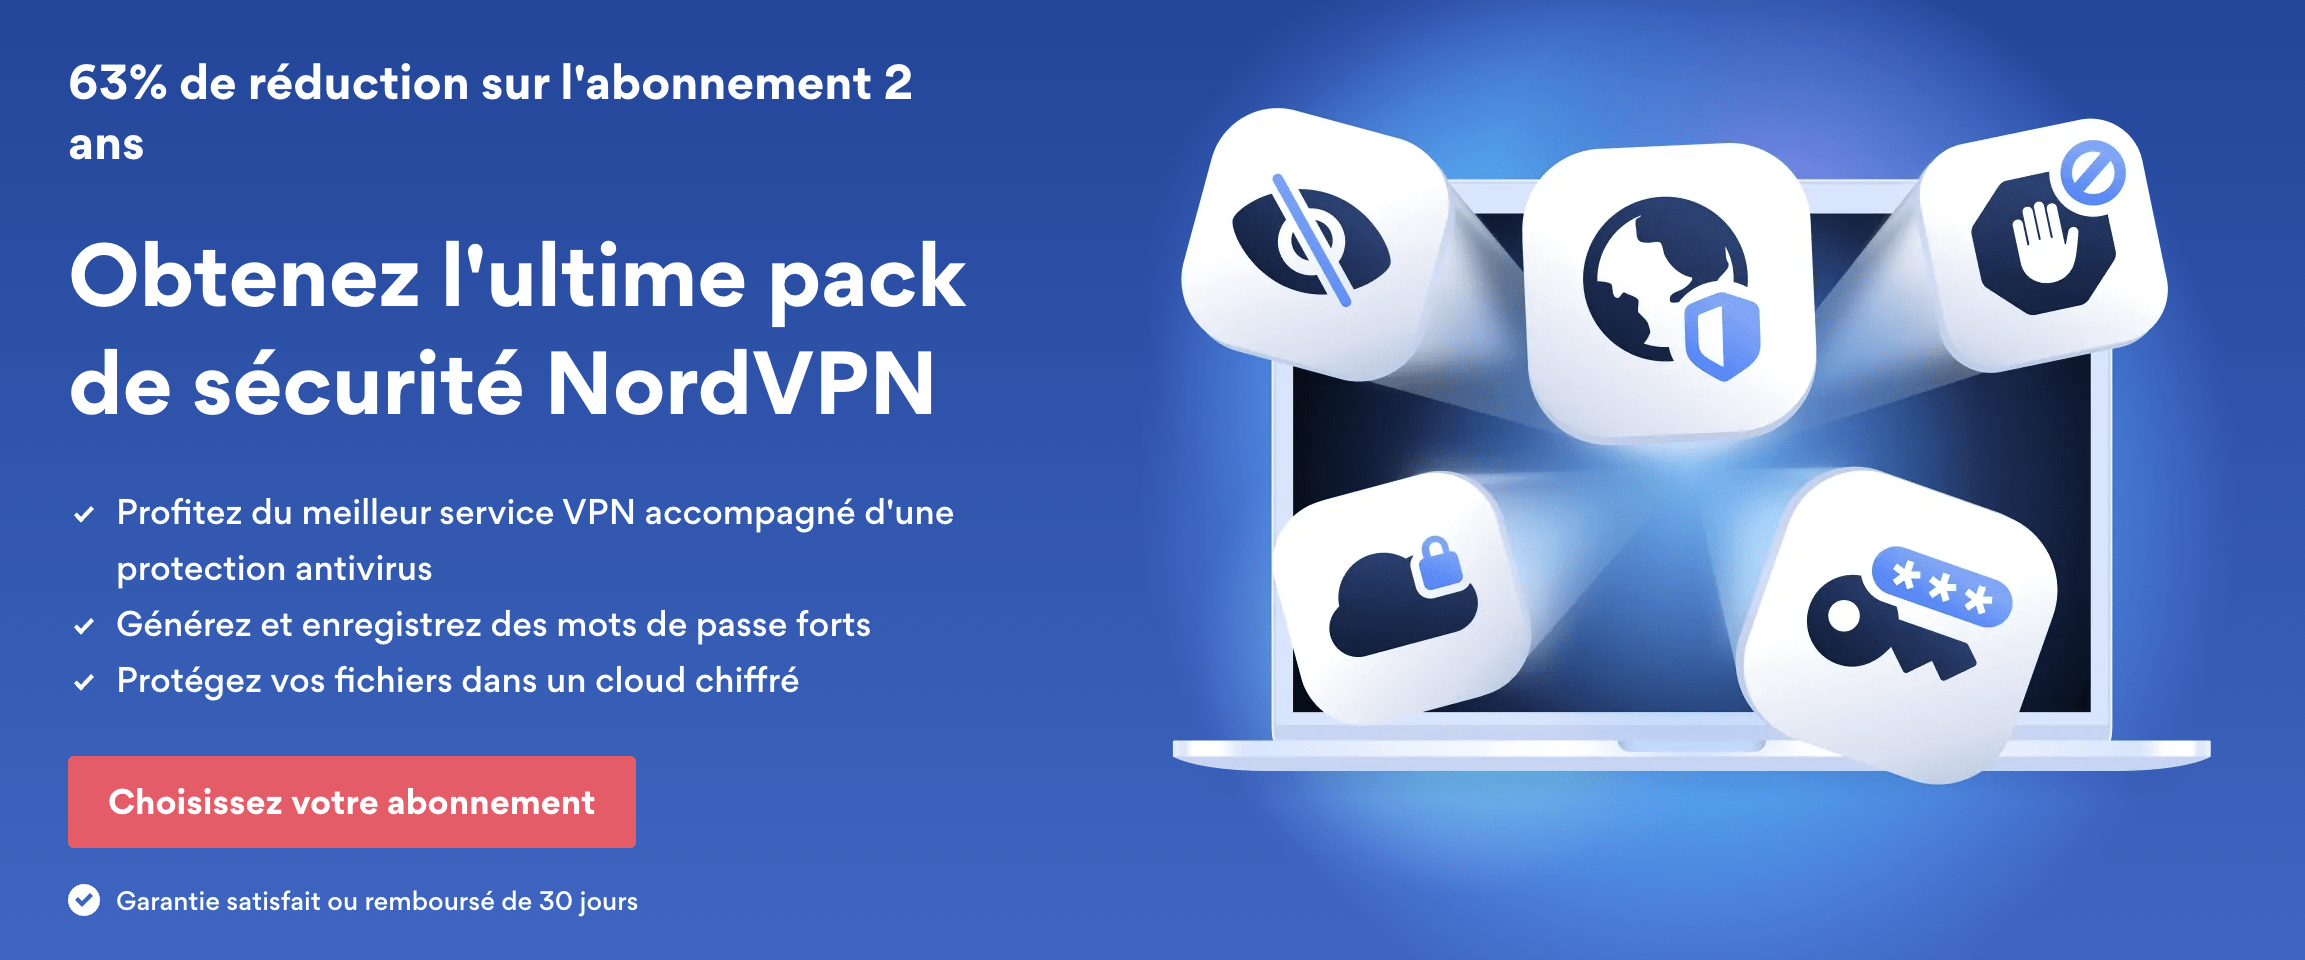 NordVPN home page FR